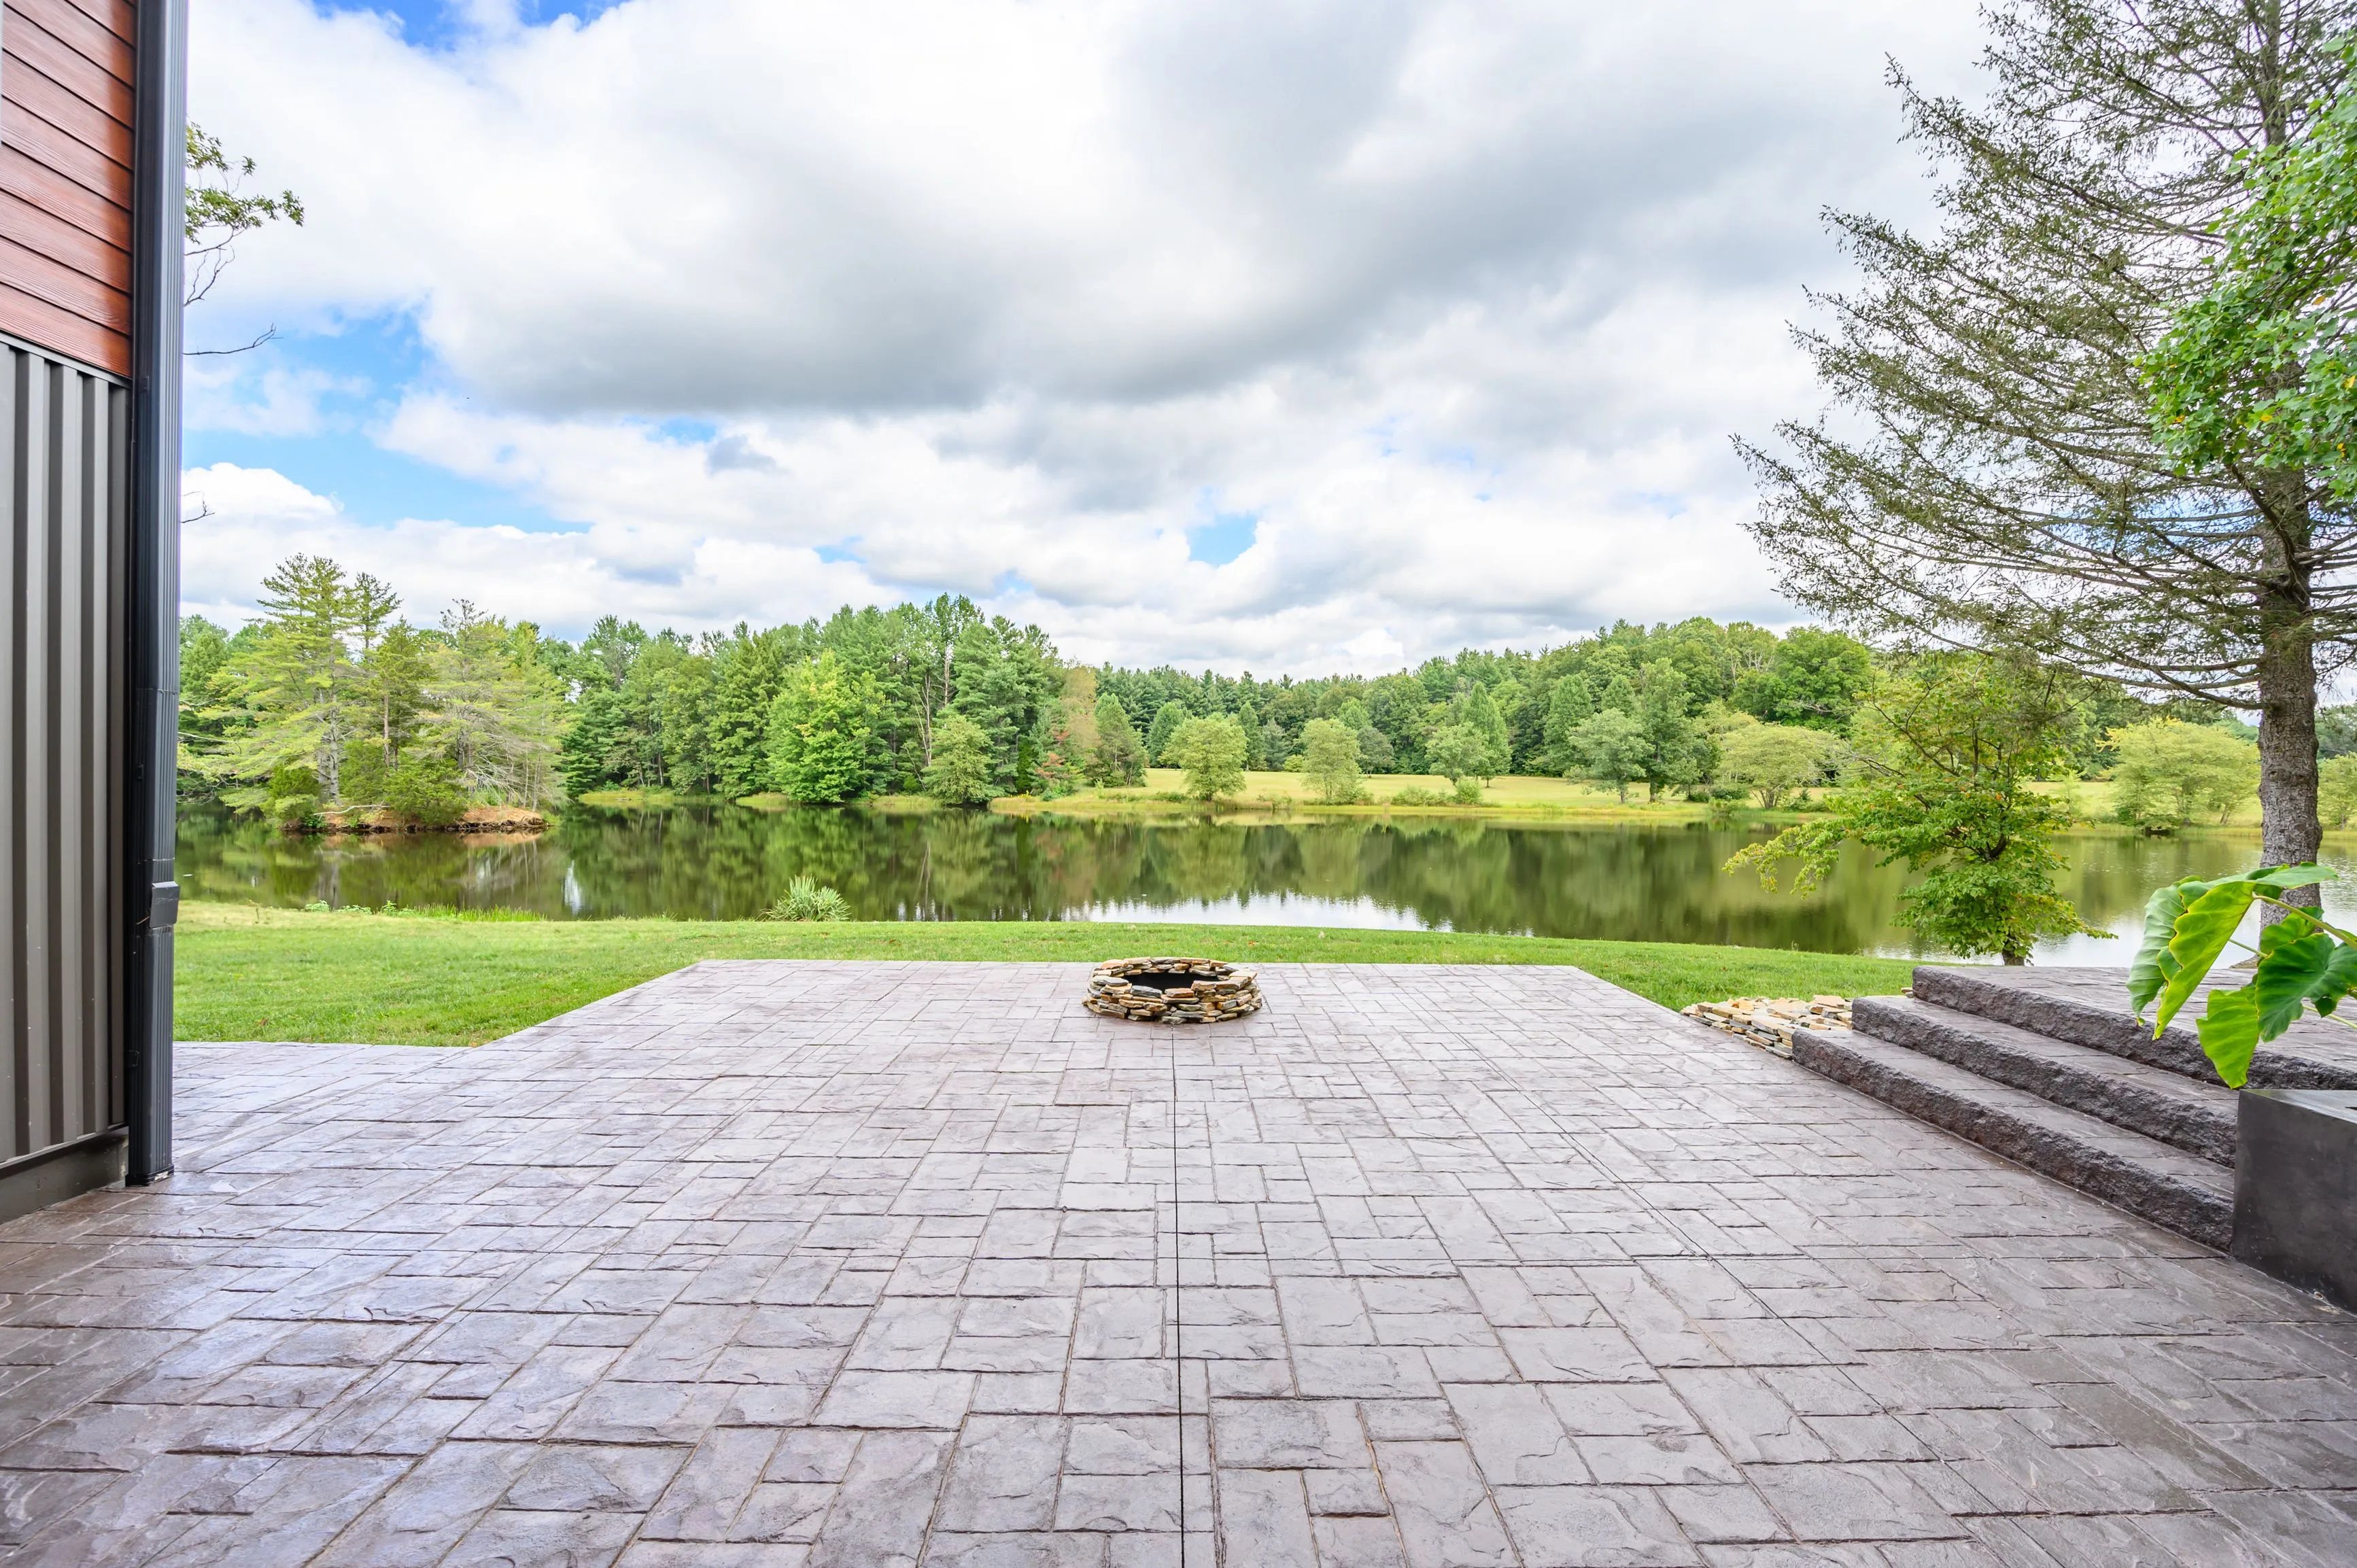 Paved patio leading to a serene lake surrounded by lush greenery and trees under a partly cloudy sky.